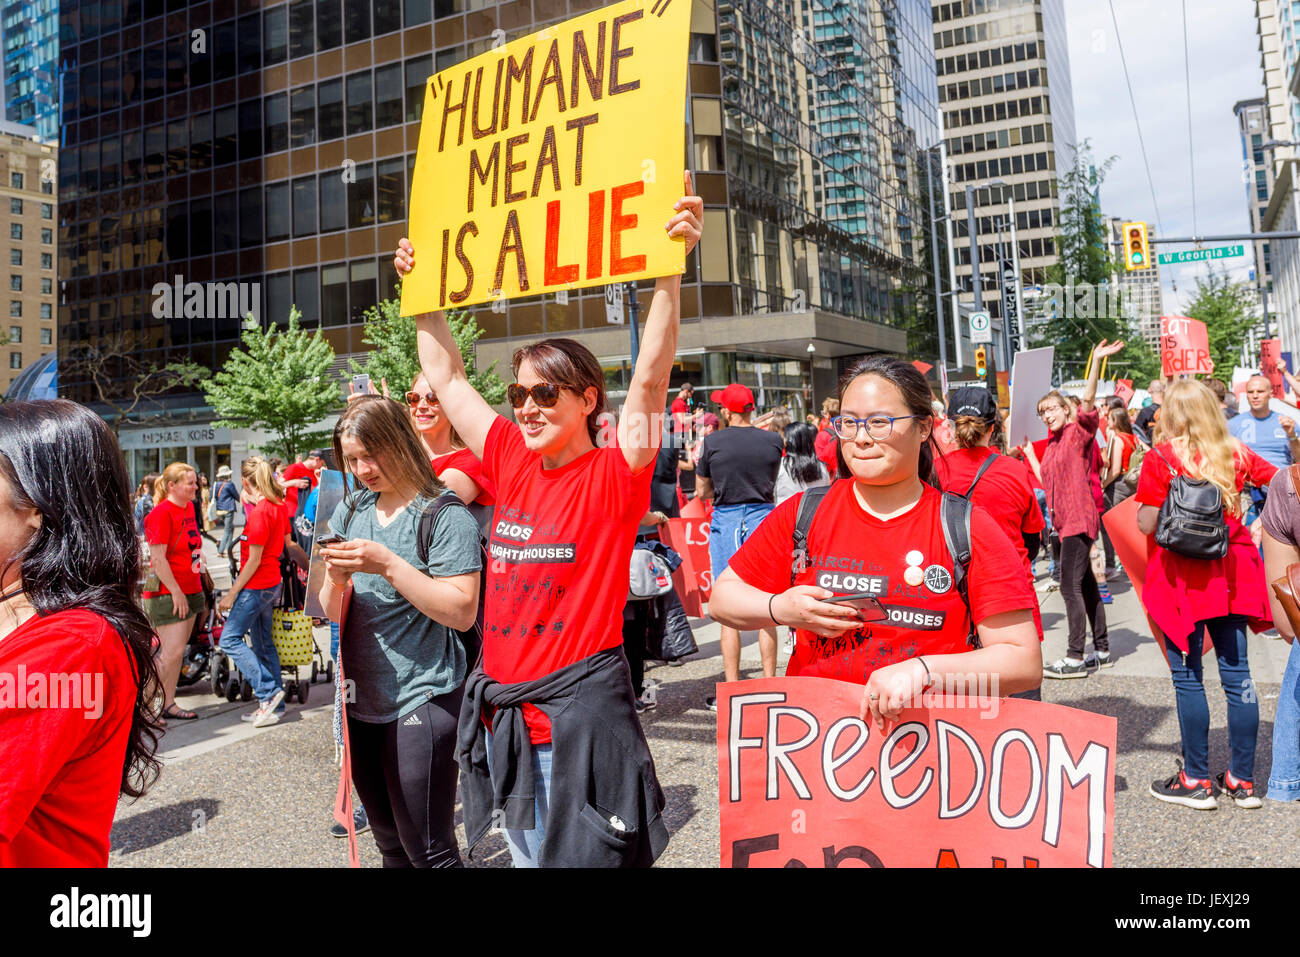 March To Close All Slaughterhouses, downtown, Vancouver, British Columbia, Canada. Stock Photo